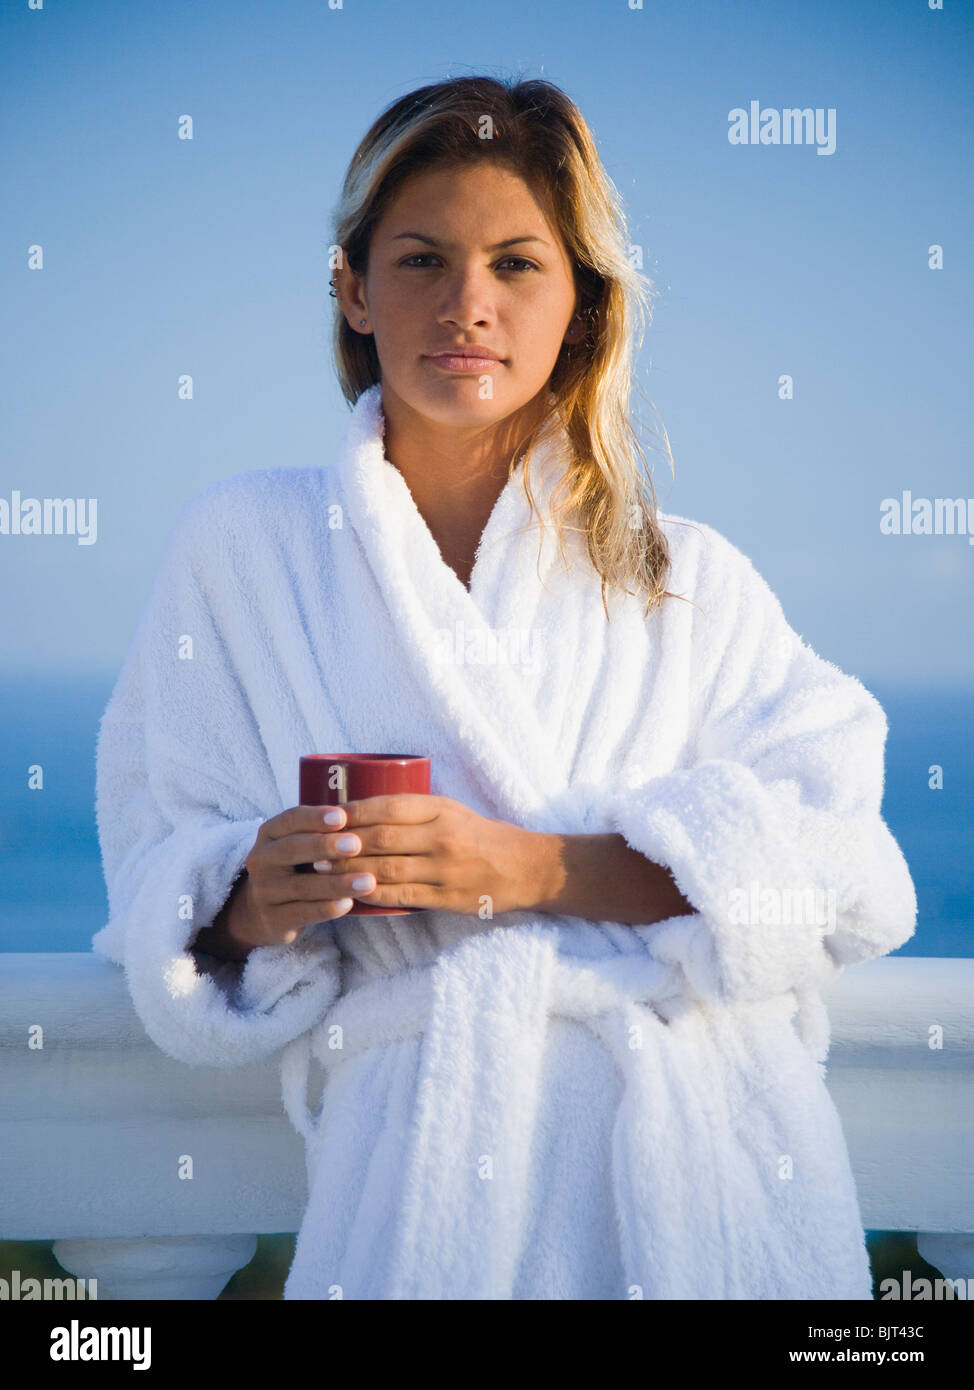 Woman in housecoat relaxing outdoors Stock Photo